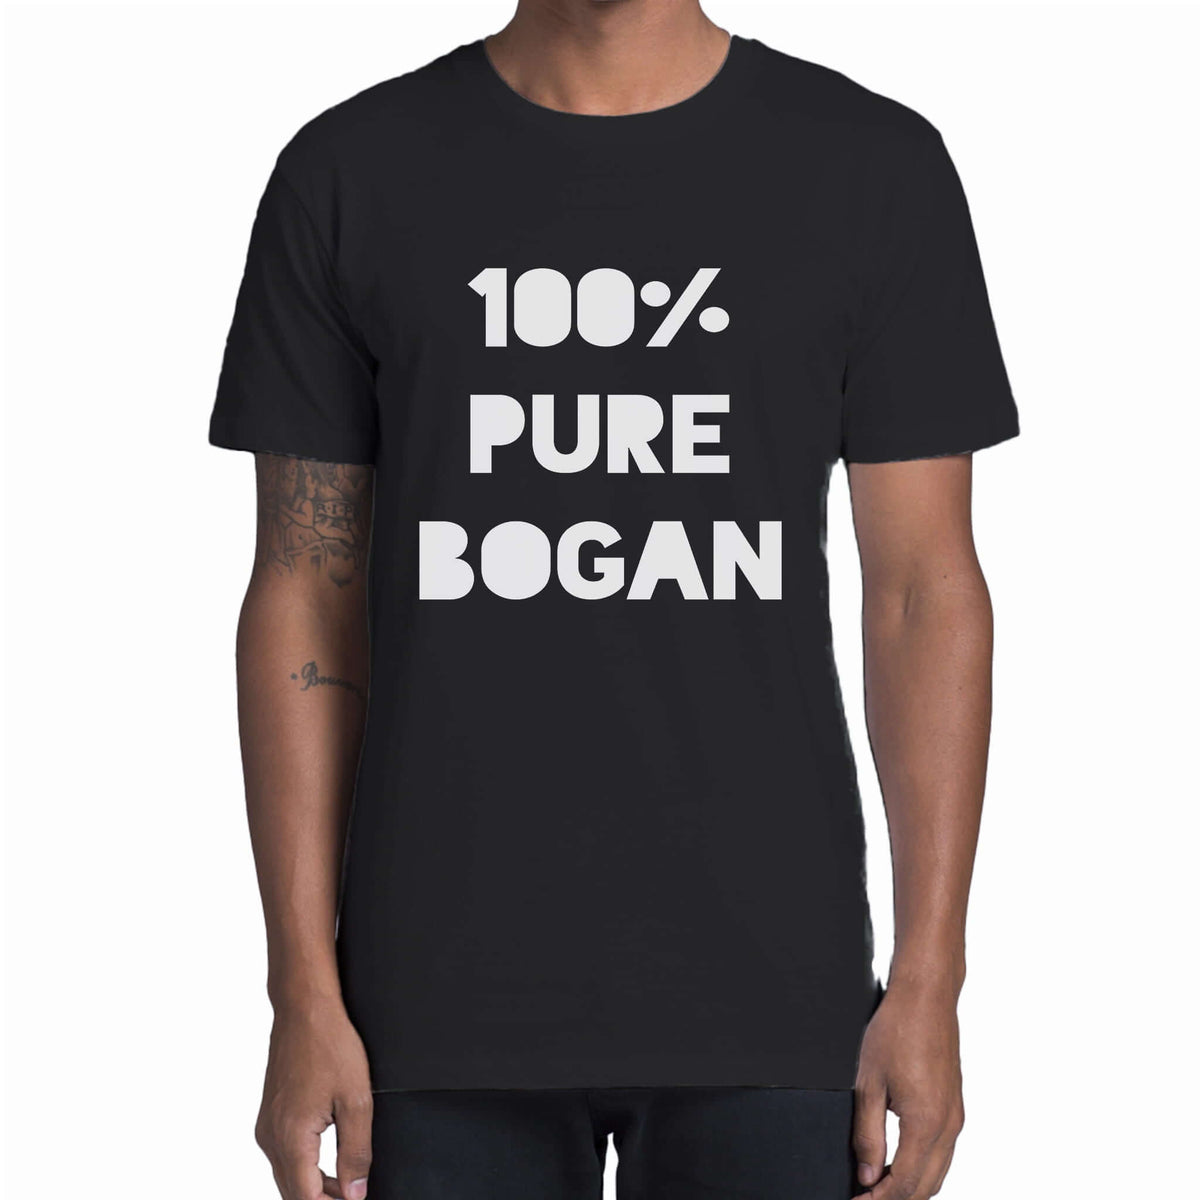 Model wears men's black tee with 100% Pure Bogan printed on the front.